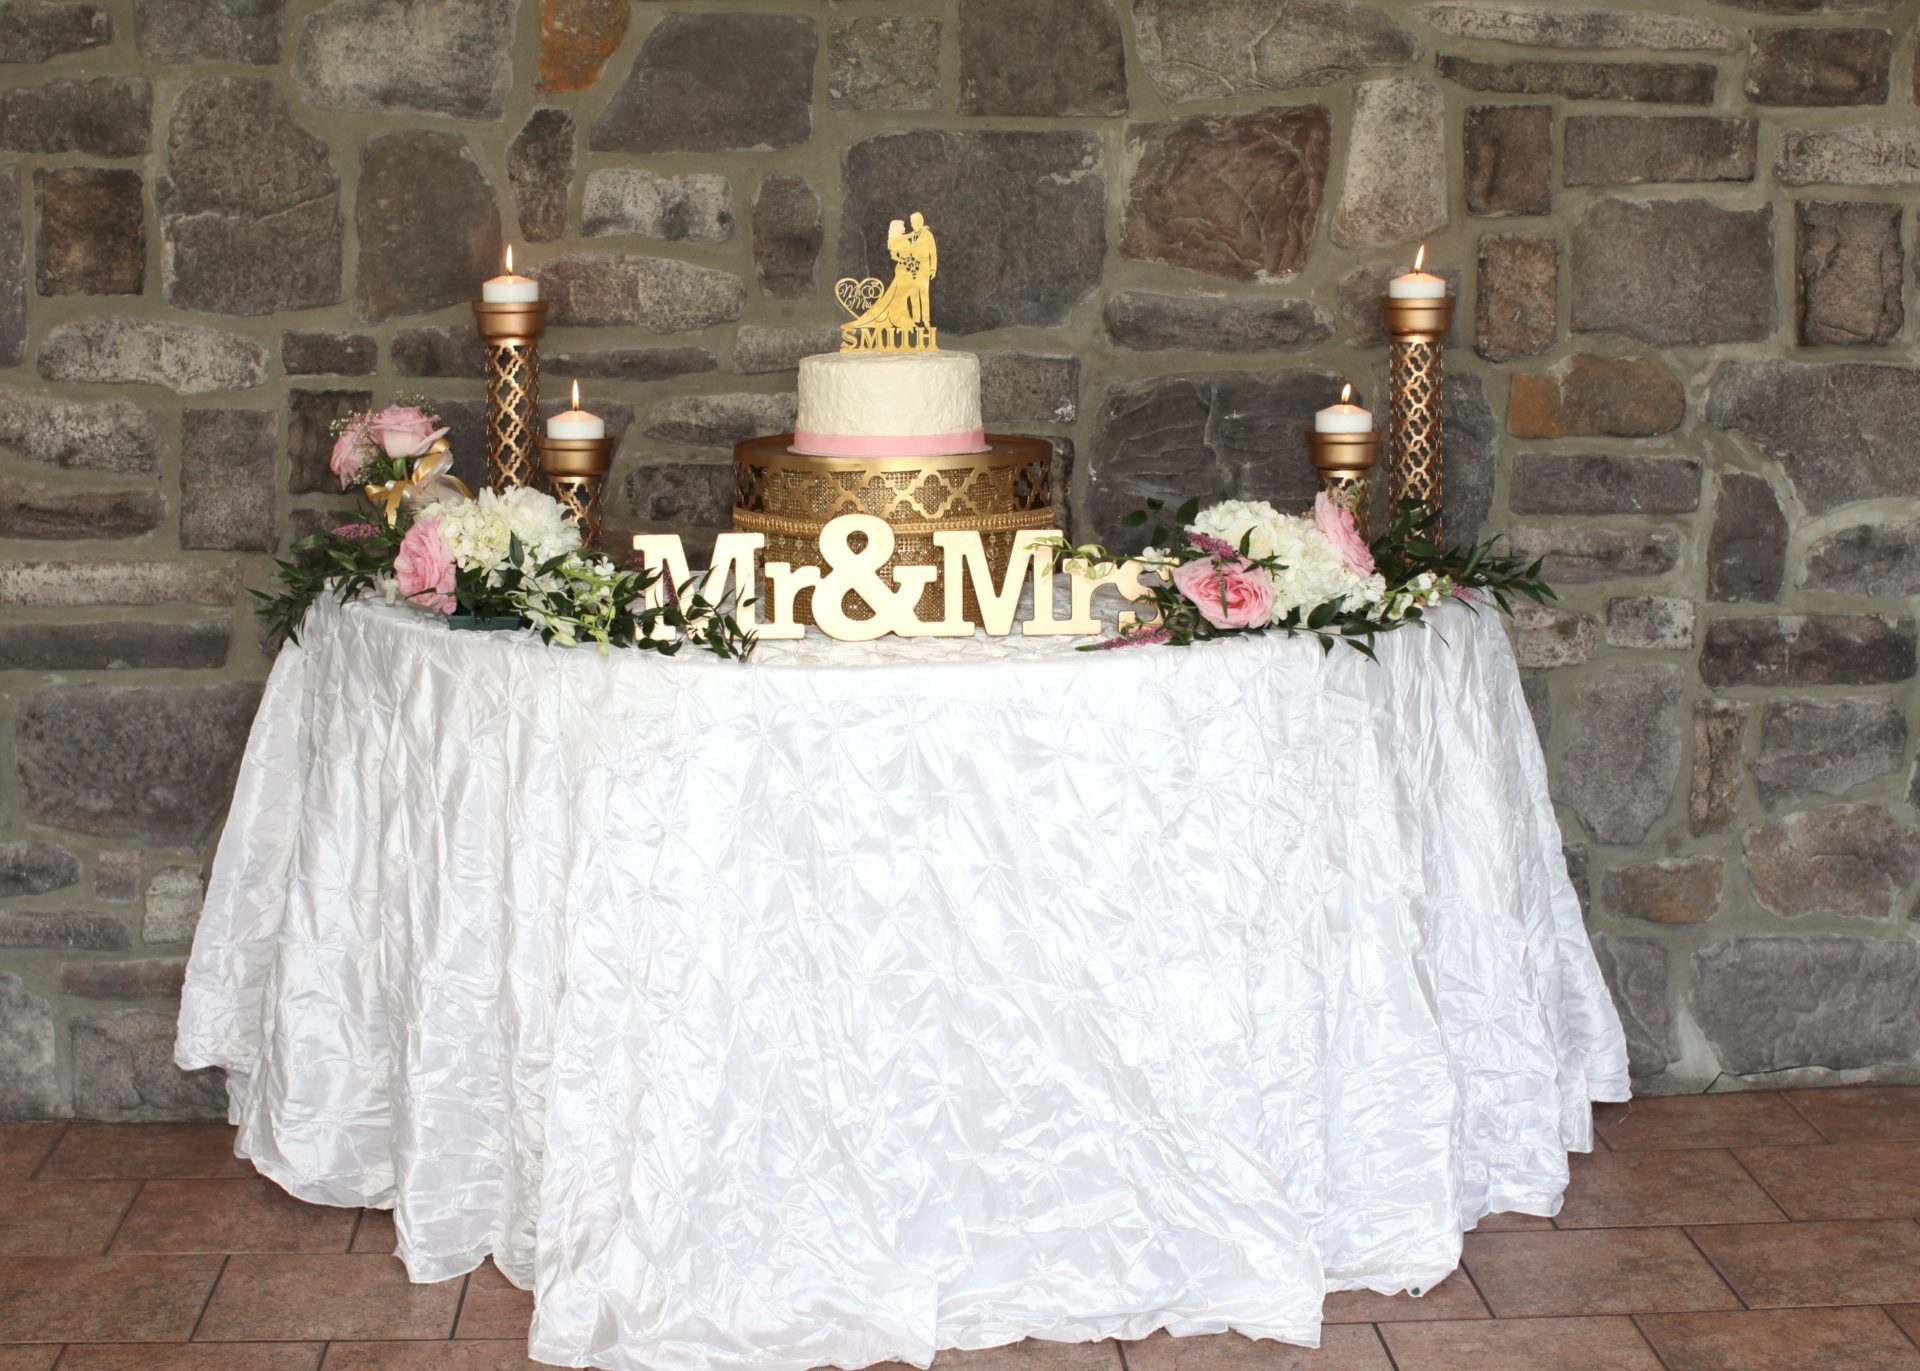 Cake table for tea party themed wedding